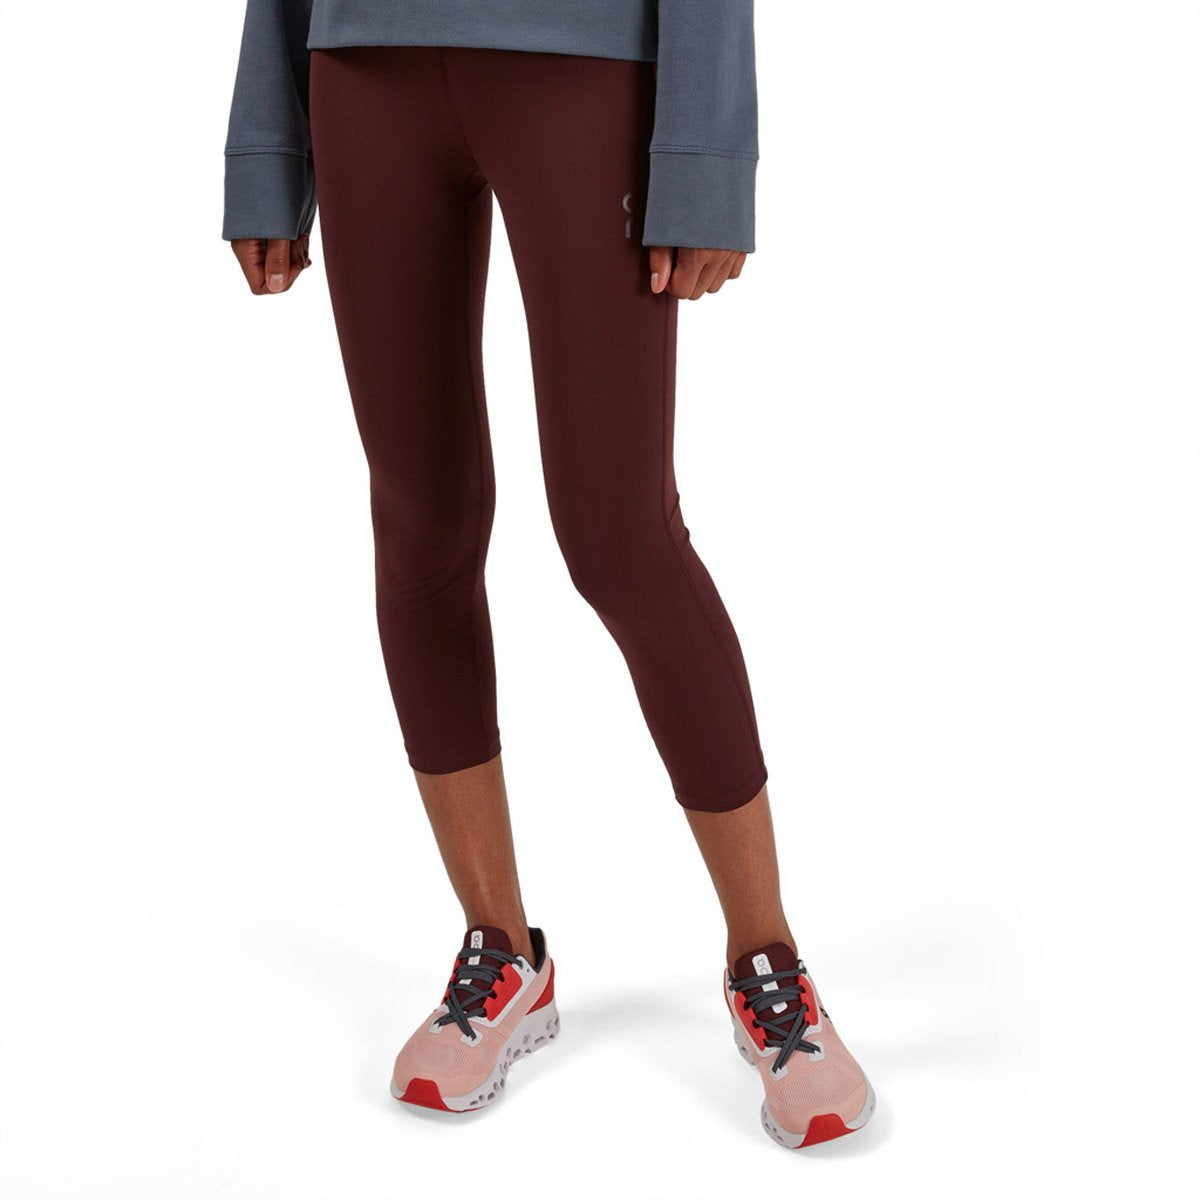 Session Tights (Women's) – The Outfitters Adventure Gear and Apparel